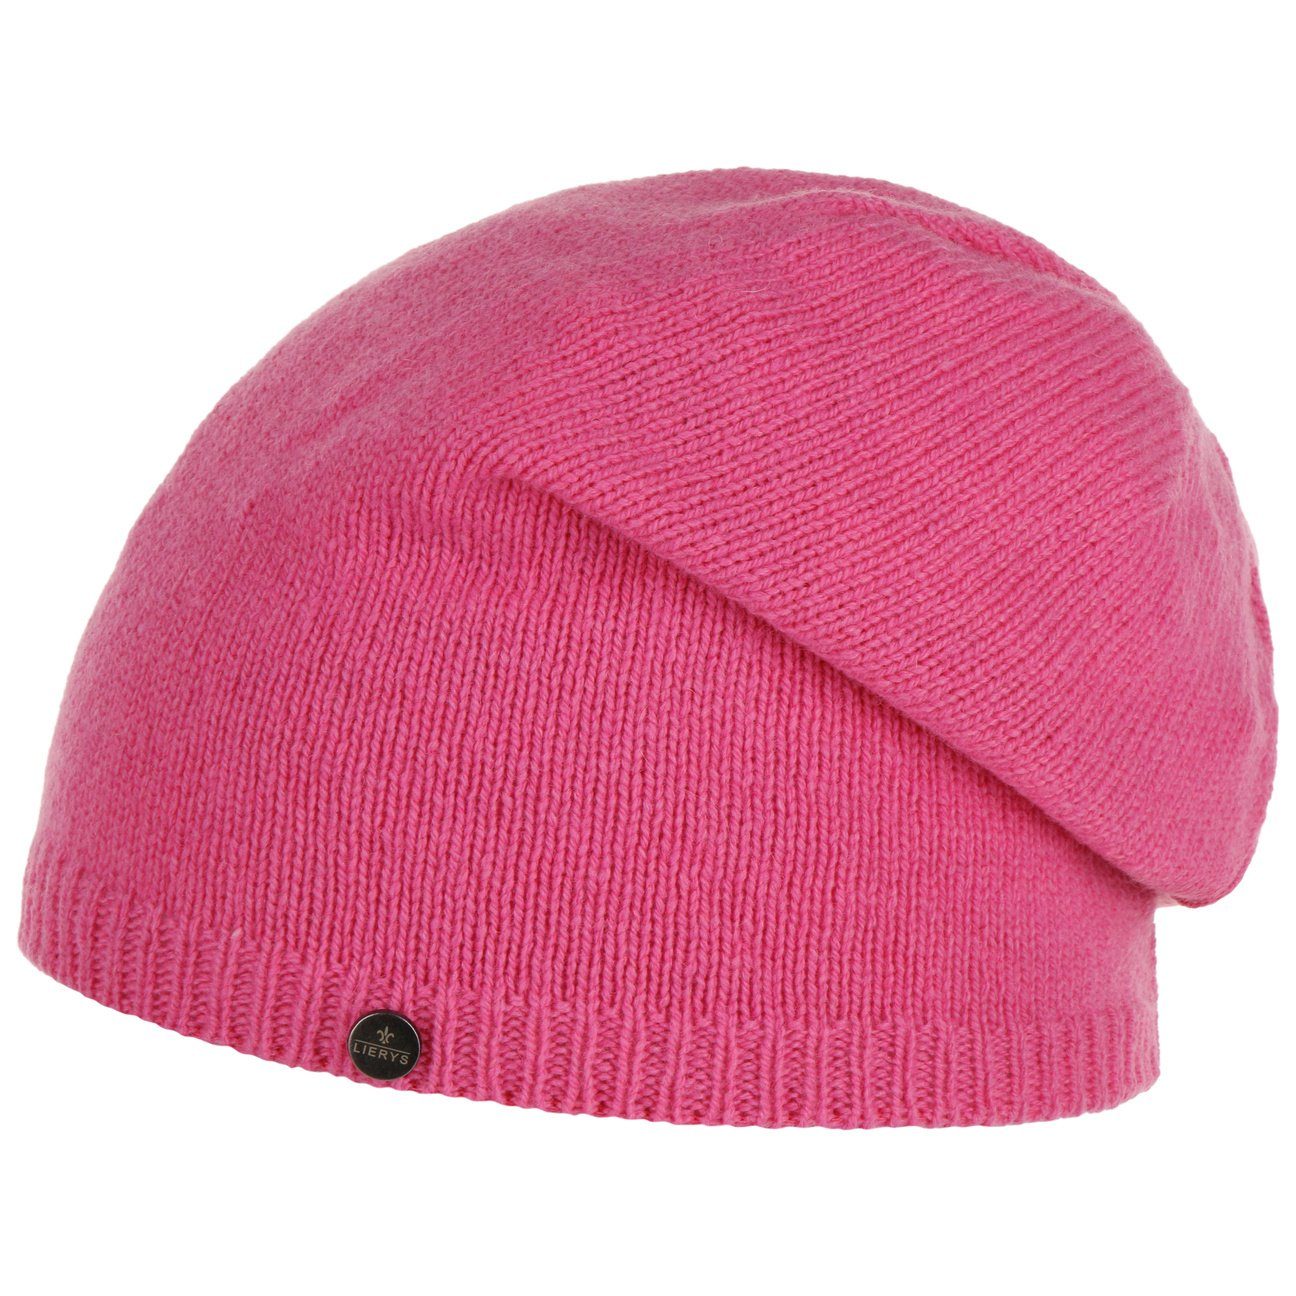 Lierys Beanie (1-St) Oversize, in pink Germany Beanie Made